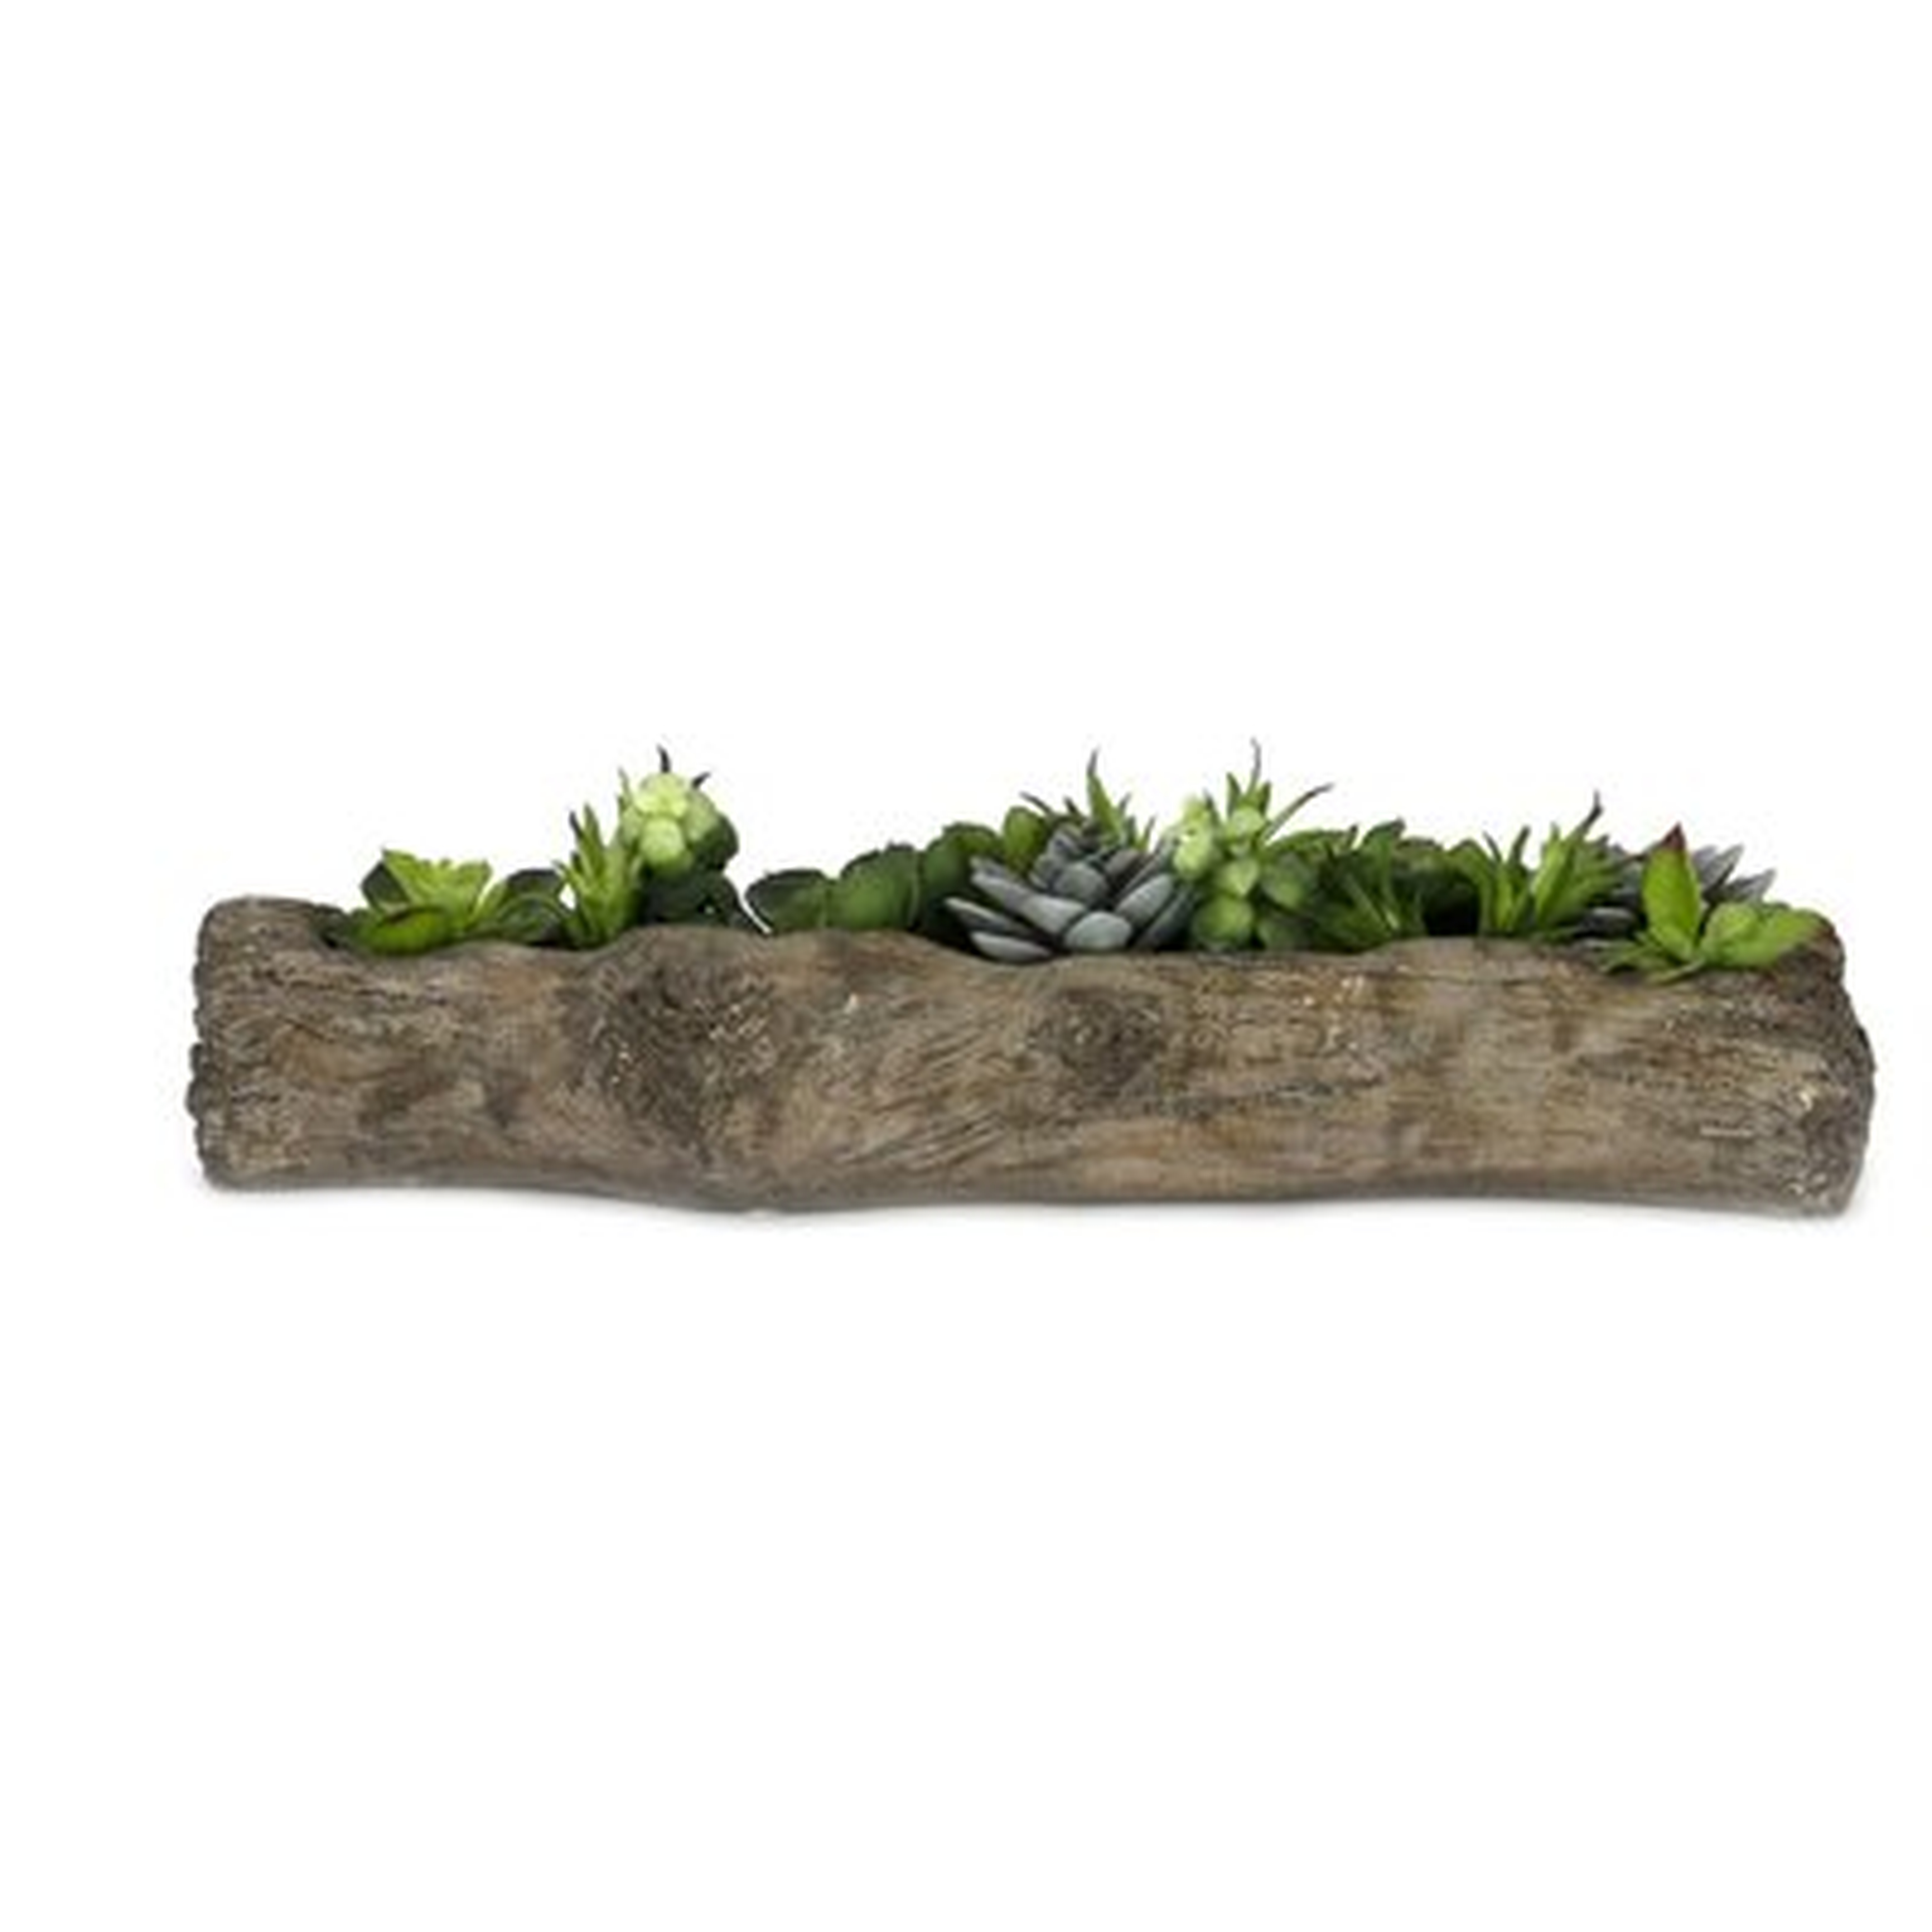 Faux Aloe and Agave Succulent in Planter - Wayfair